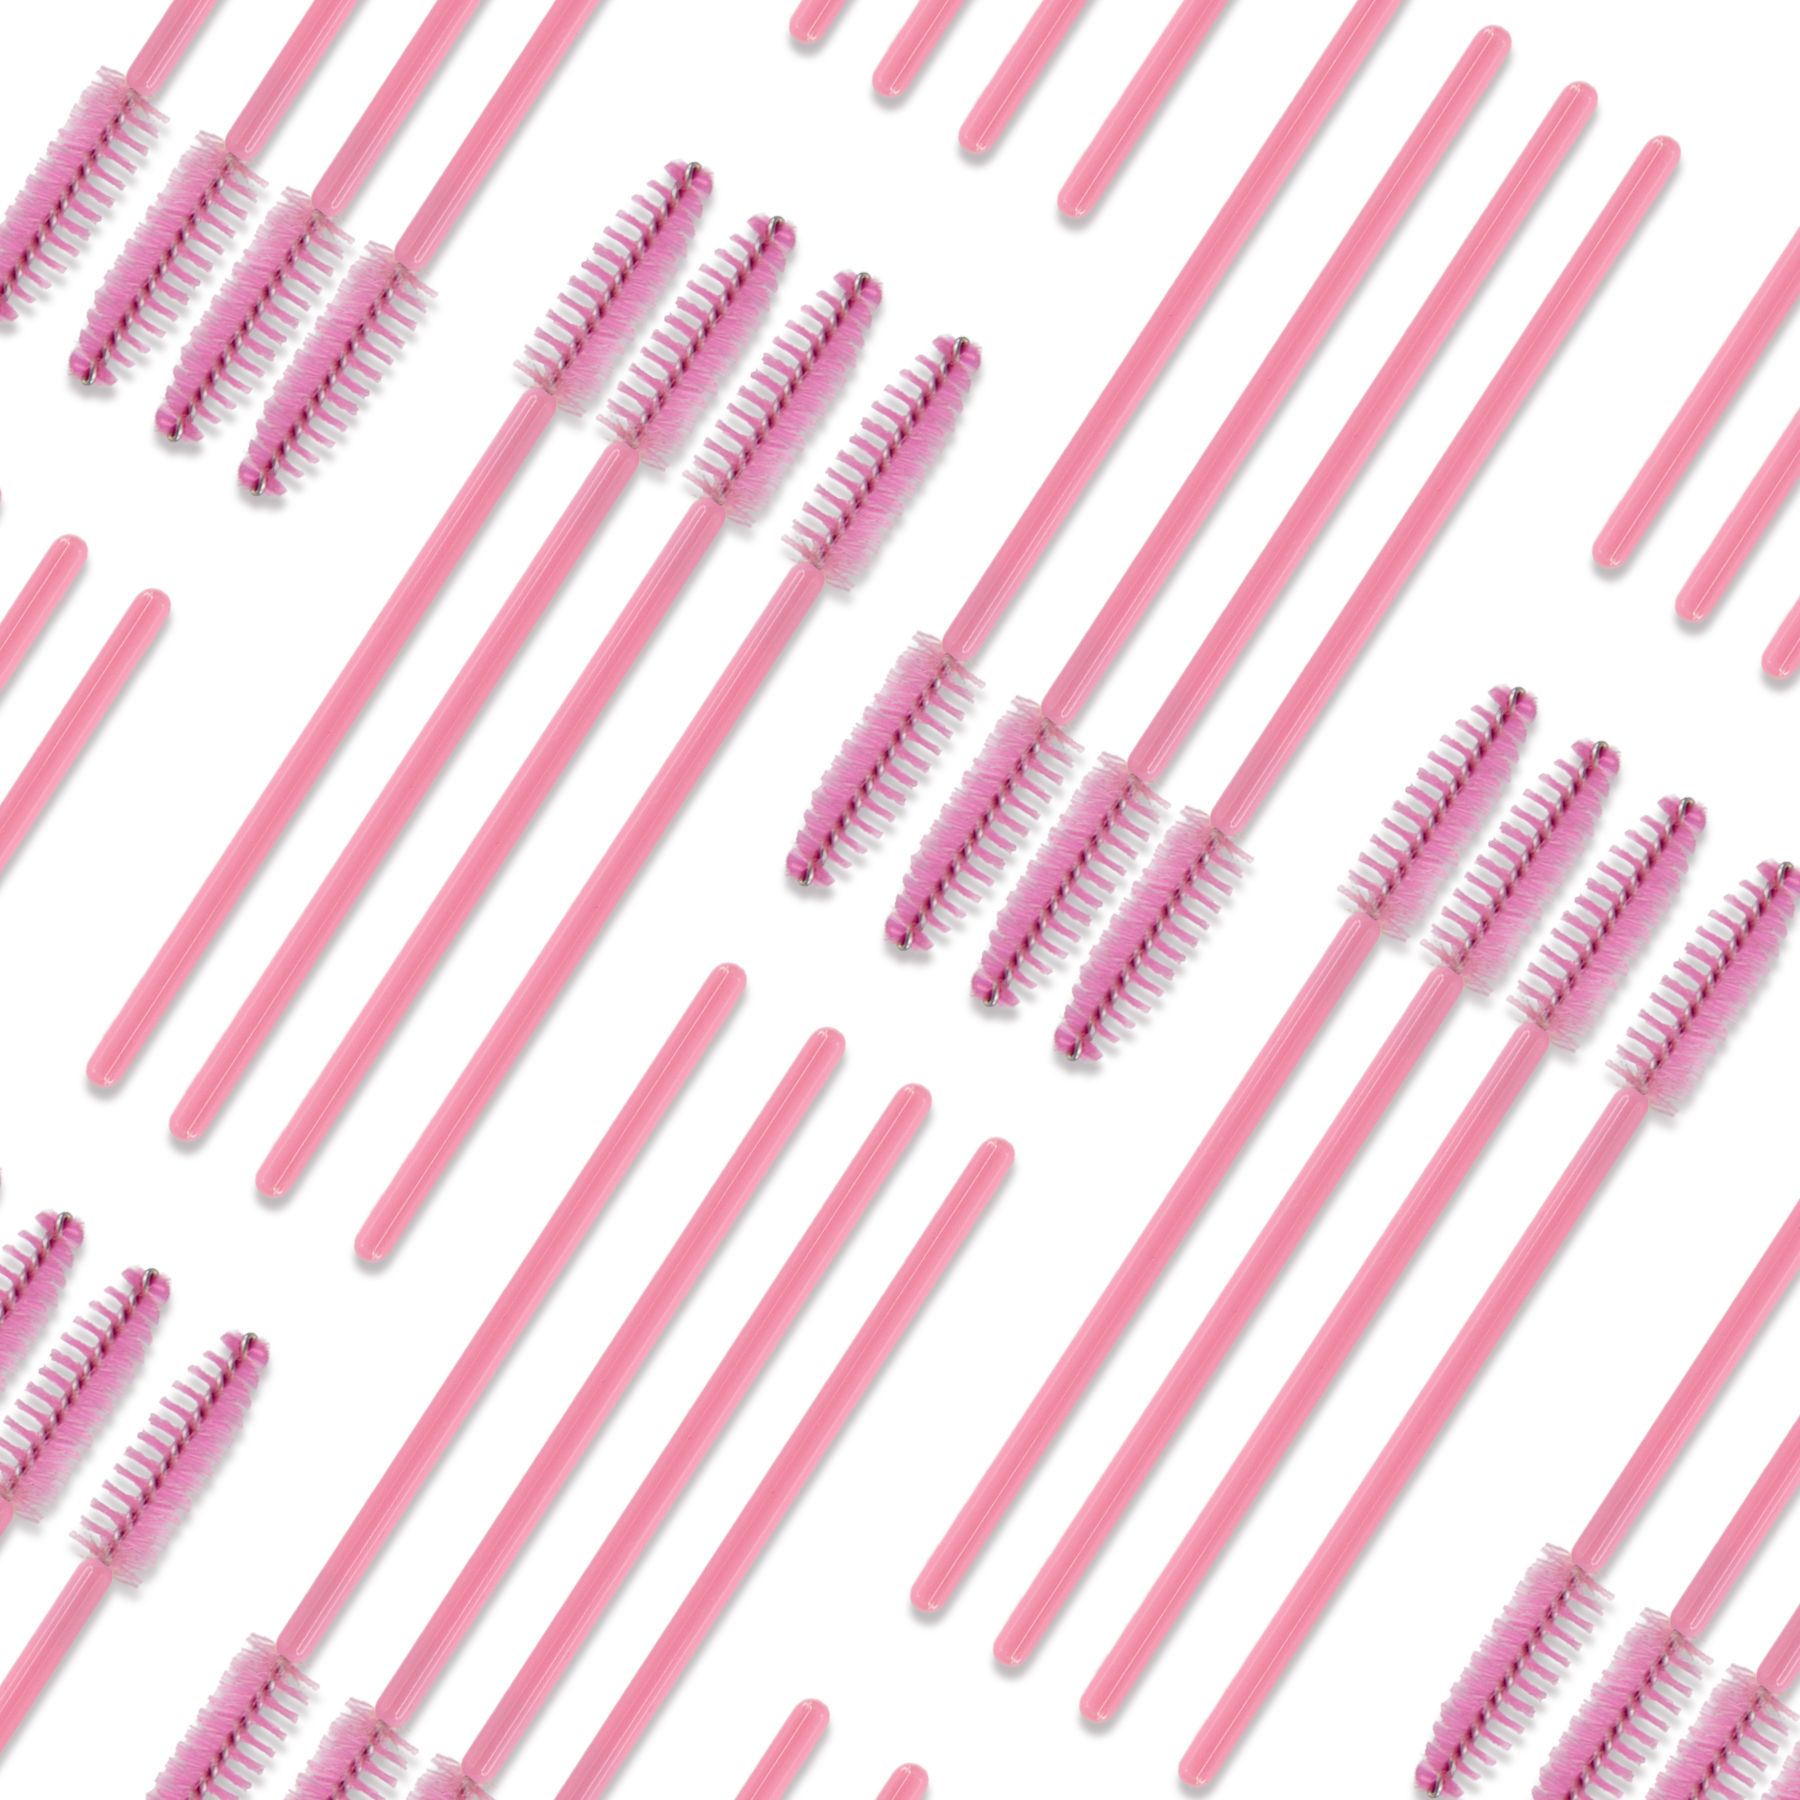 Mascara brushes | different types